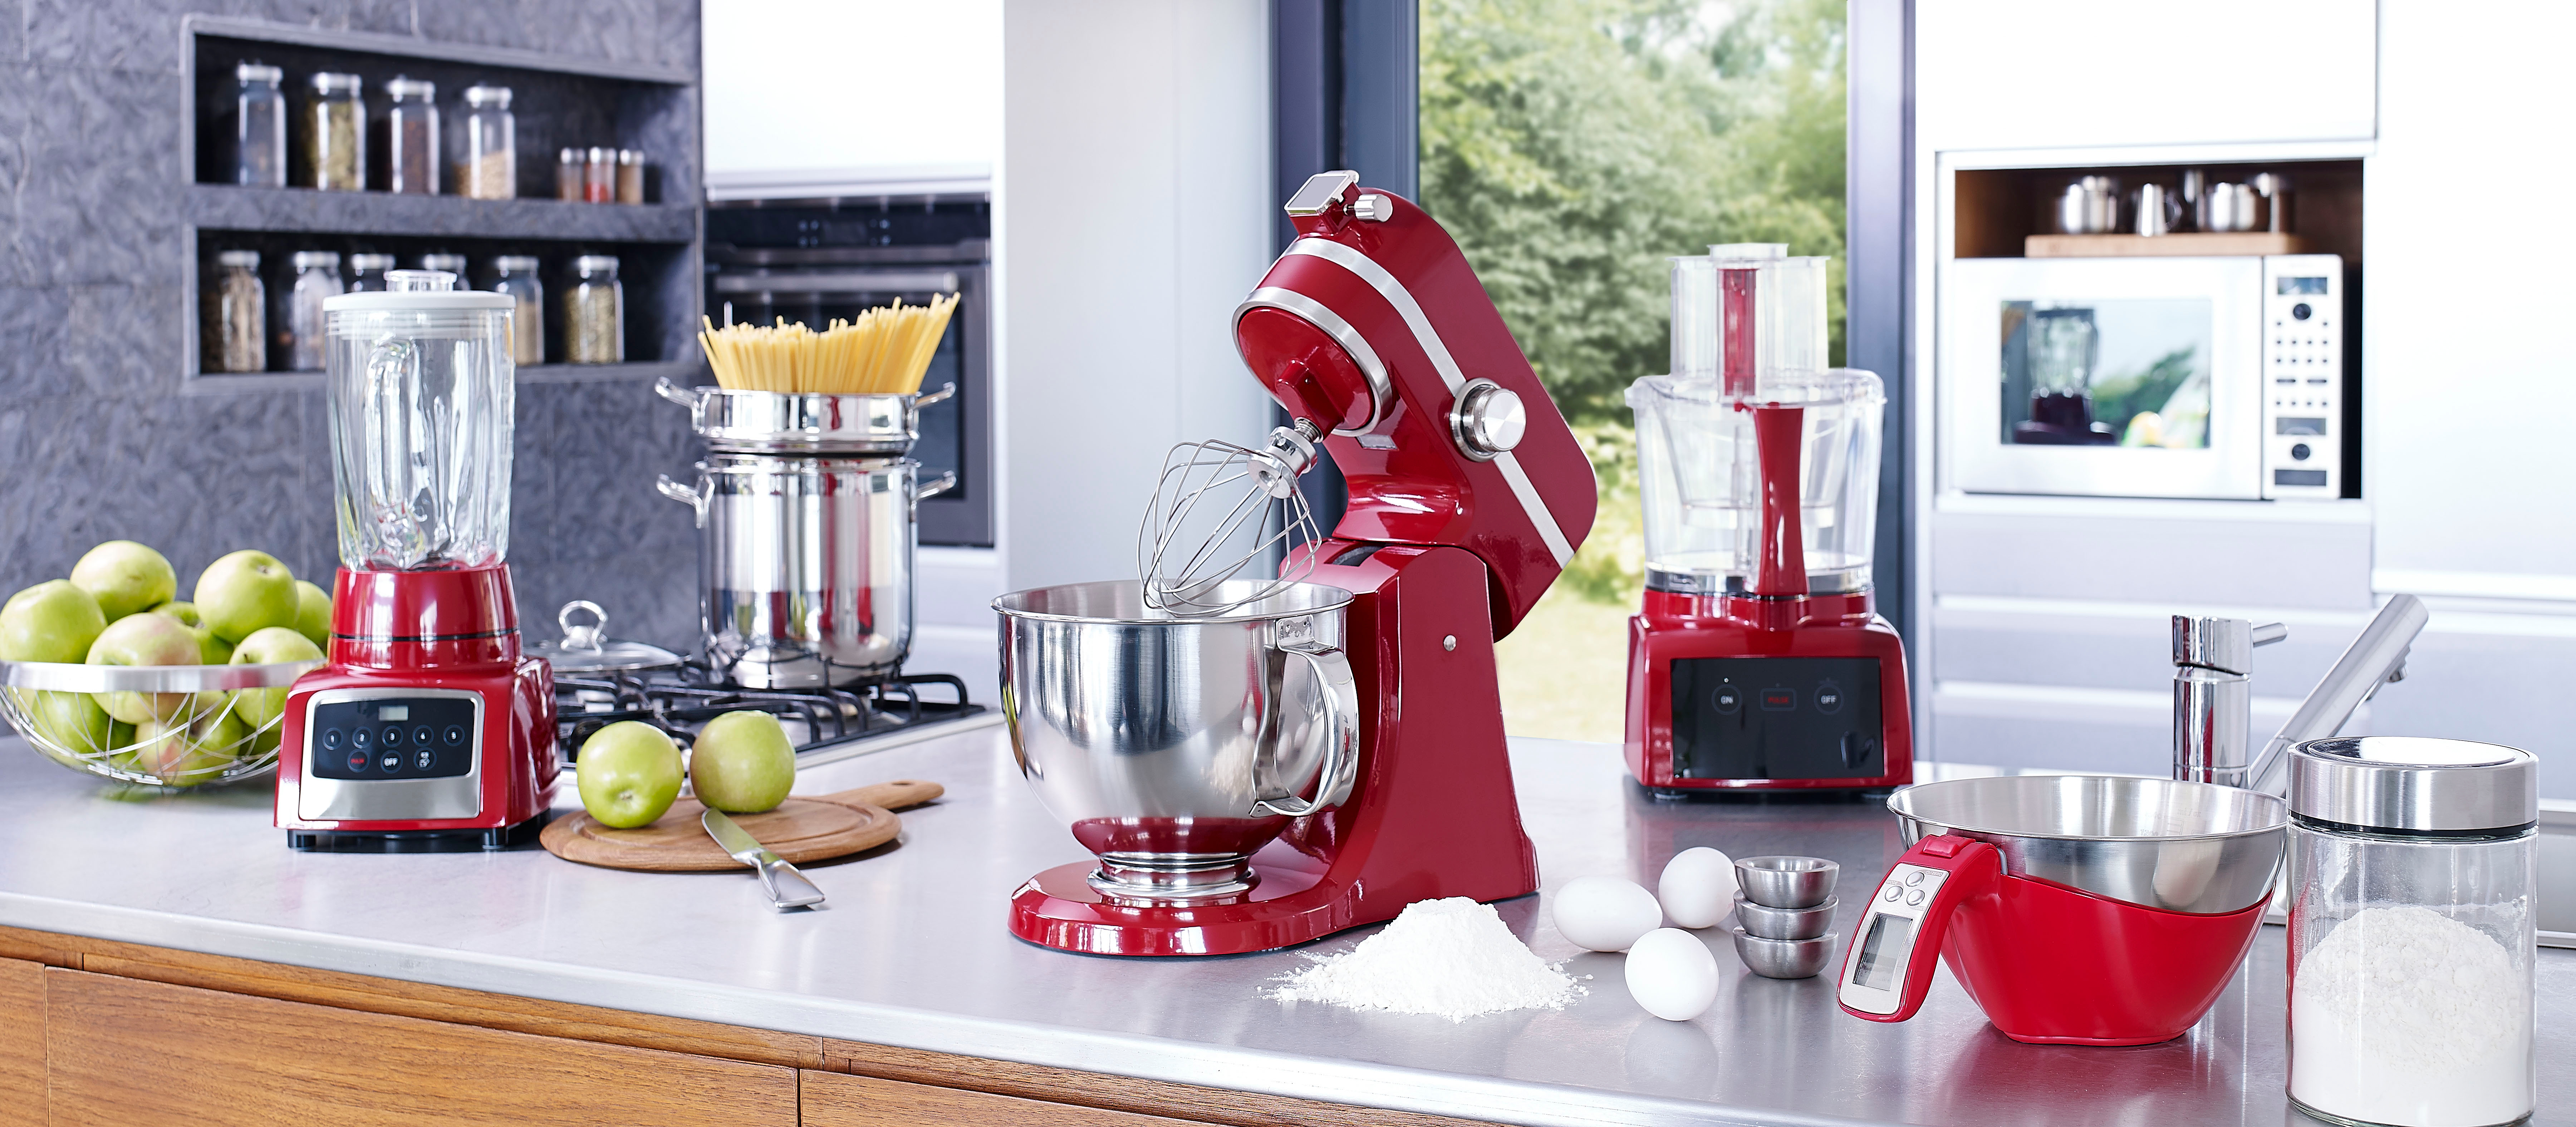 small appliances on kitchen counter